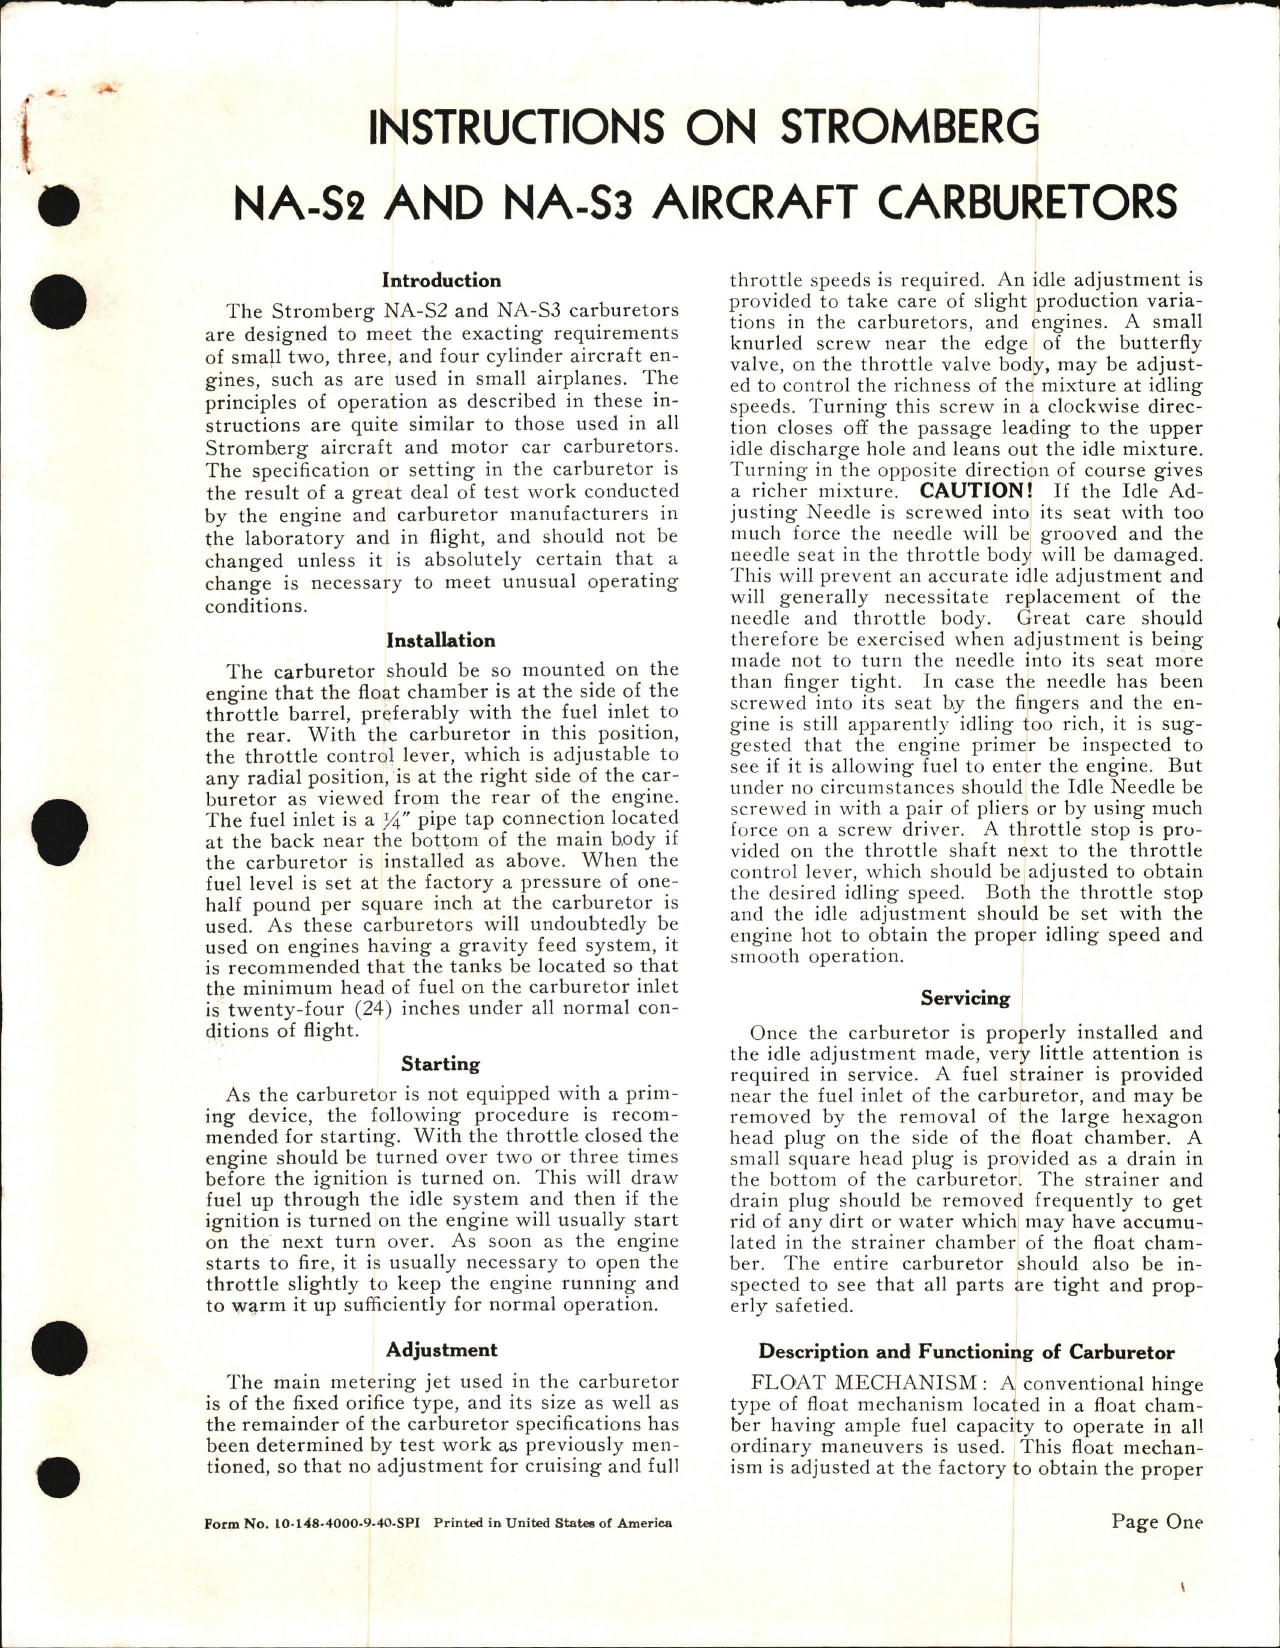 Sample page 1 from AirCorps Library document: Instructions on Stromberg NA-S2 and NA-S3 Aircraft Carburetors